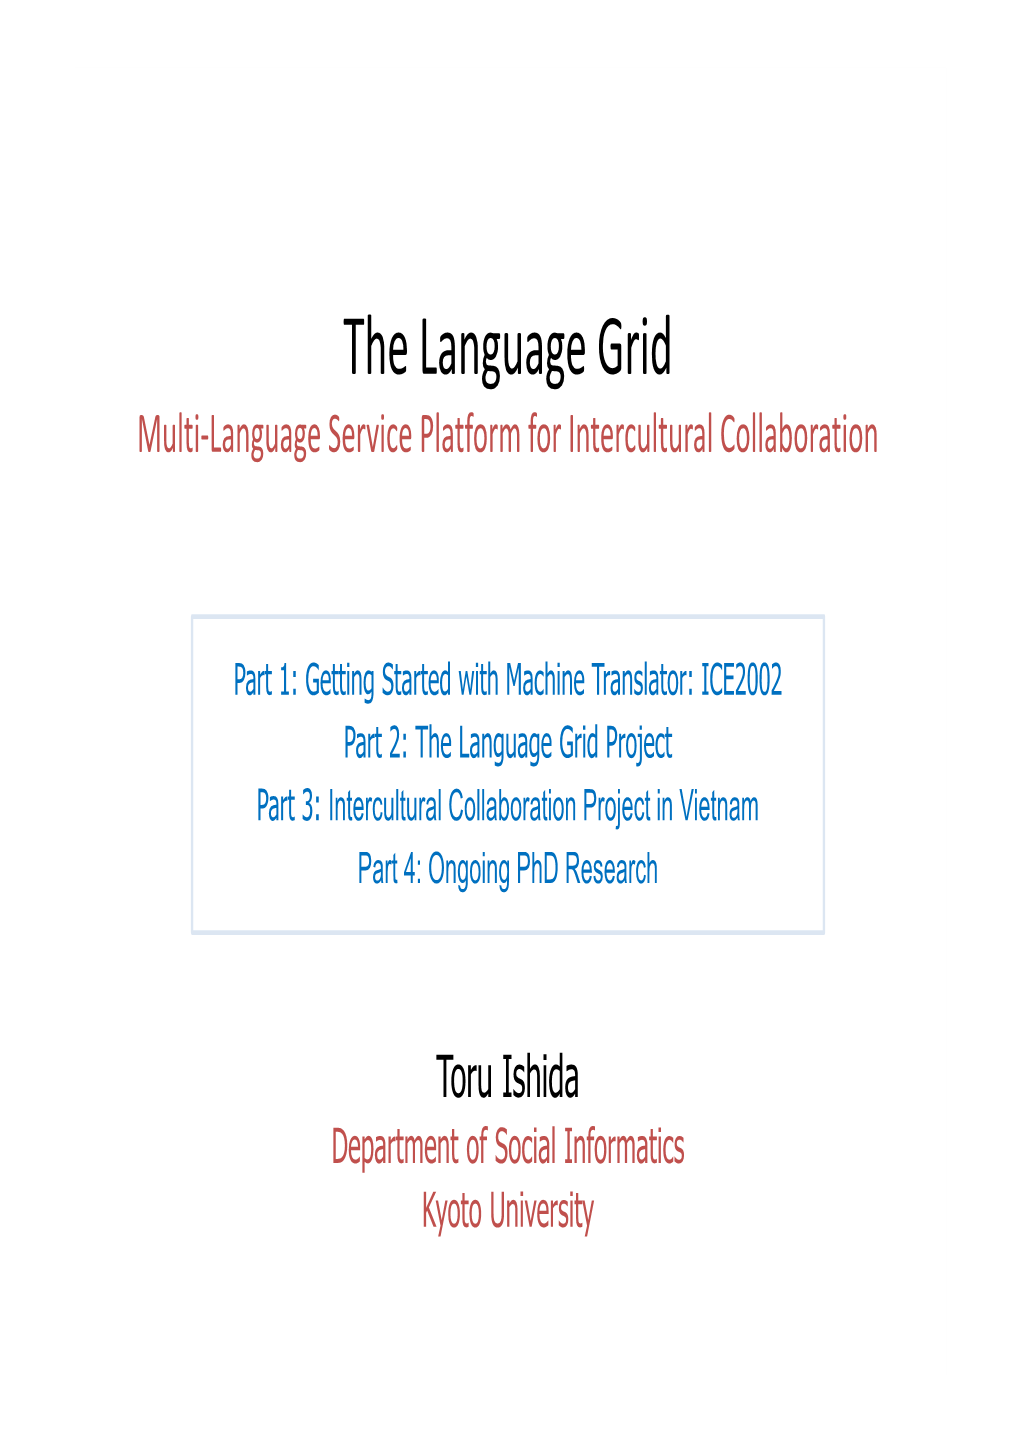 The Language Grid Project Part 3: Intercultural Collaboration Project in Vietnam Part 4: Ongoing Phd Research